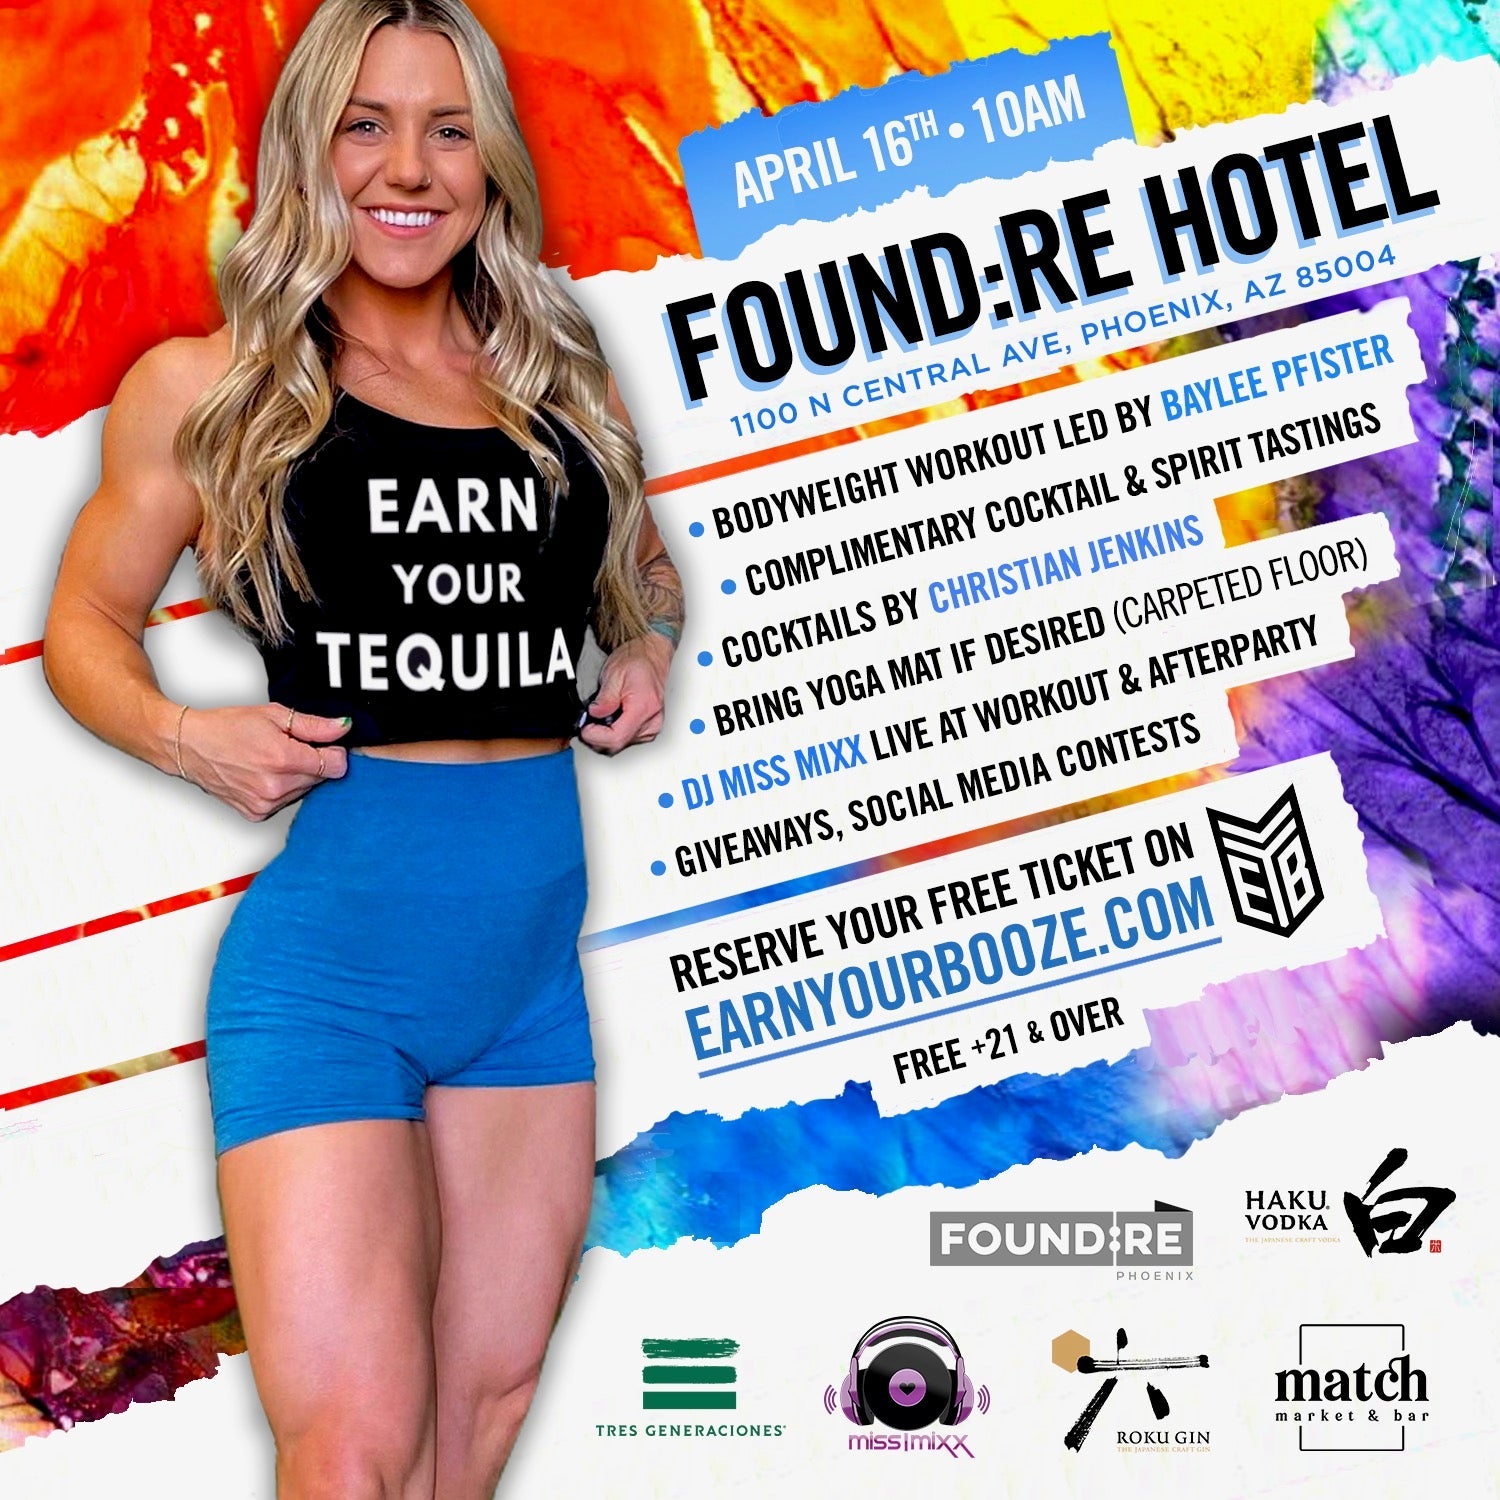 EARN YOUR BOOZE @ FOUND:RE HOTEL | APRIL 16 | PHOENIX